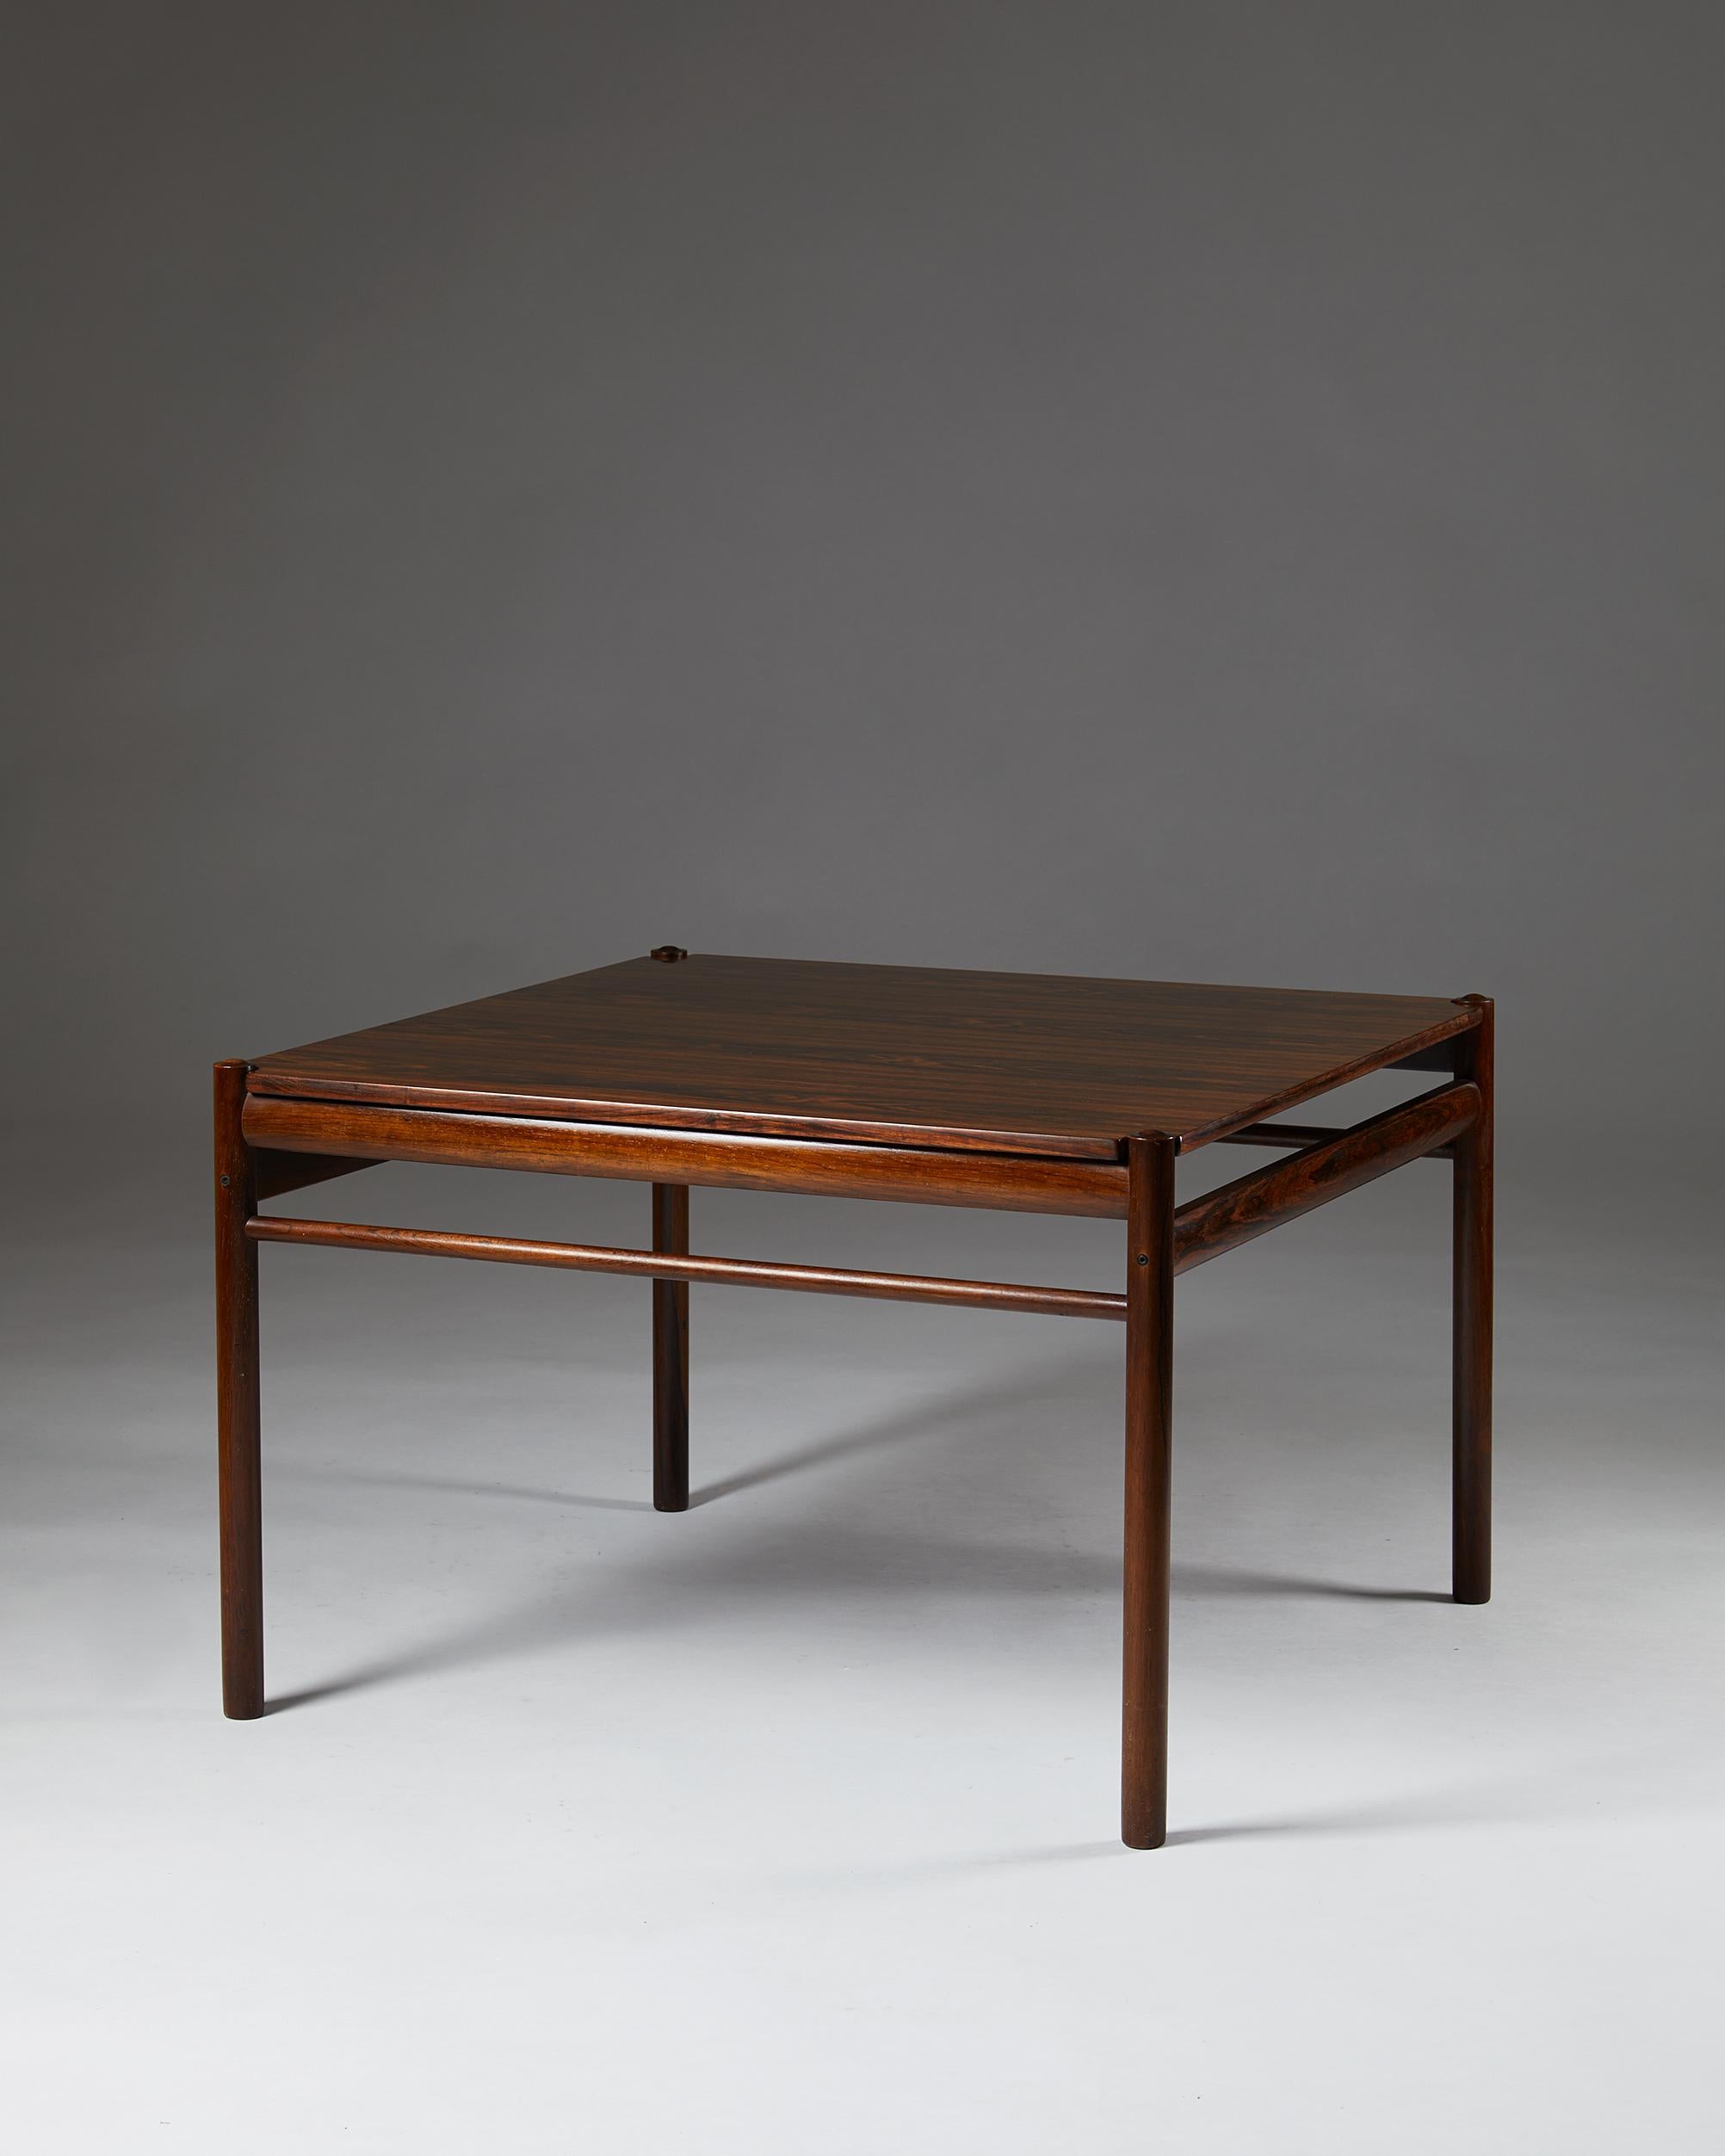 Denmark. 1950s.
Rosewood with reversible black lacquered and rosewood top.

Measures: H 52.5 cm/ 20 3/4